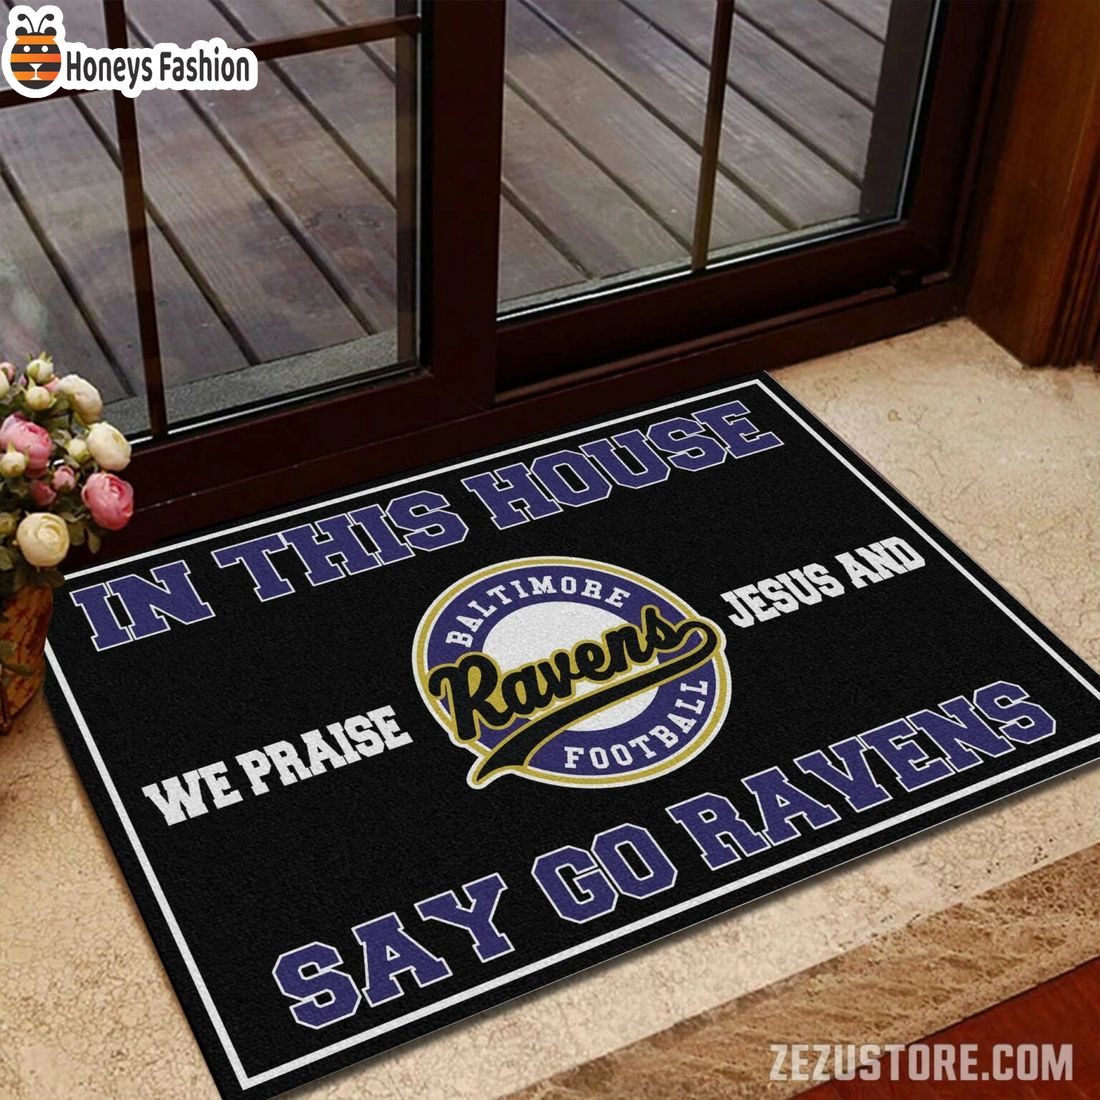 In this house we praise jesus and say go Ravens doormat